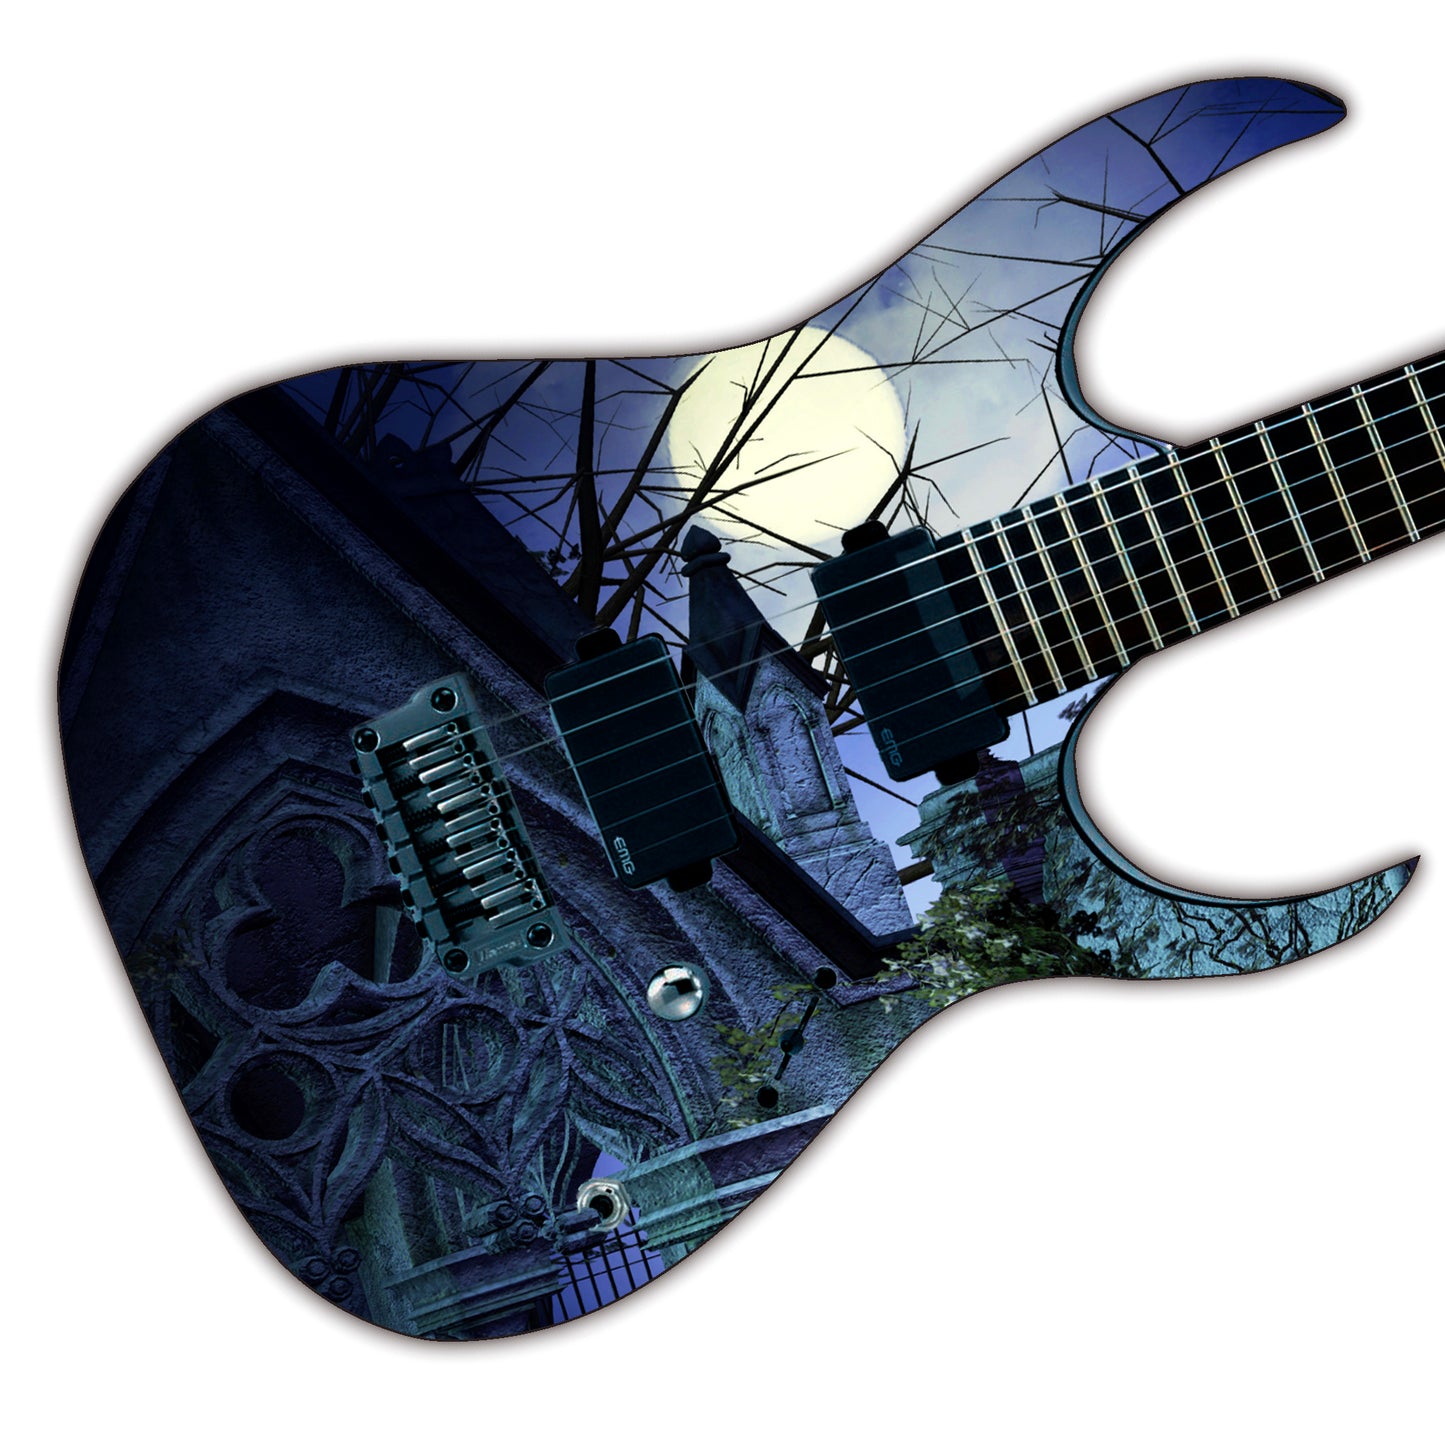 Guitar, Bass or Acoustic Skin Wrap Laminated Vinyl Decal Sticker Gothic Moon GS74